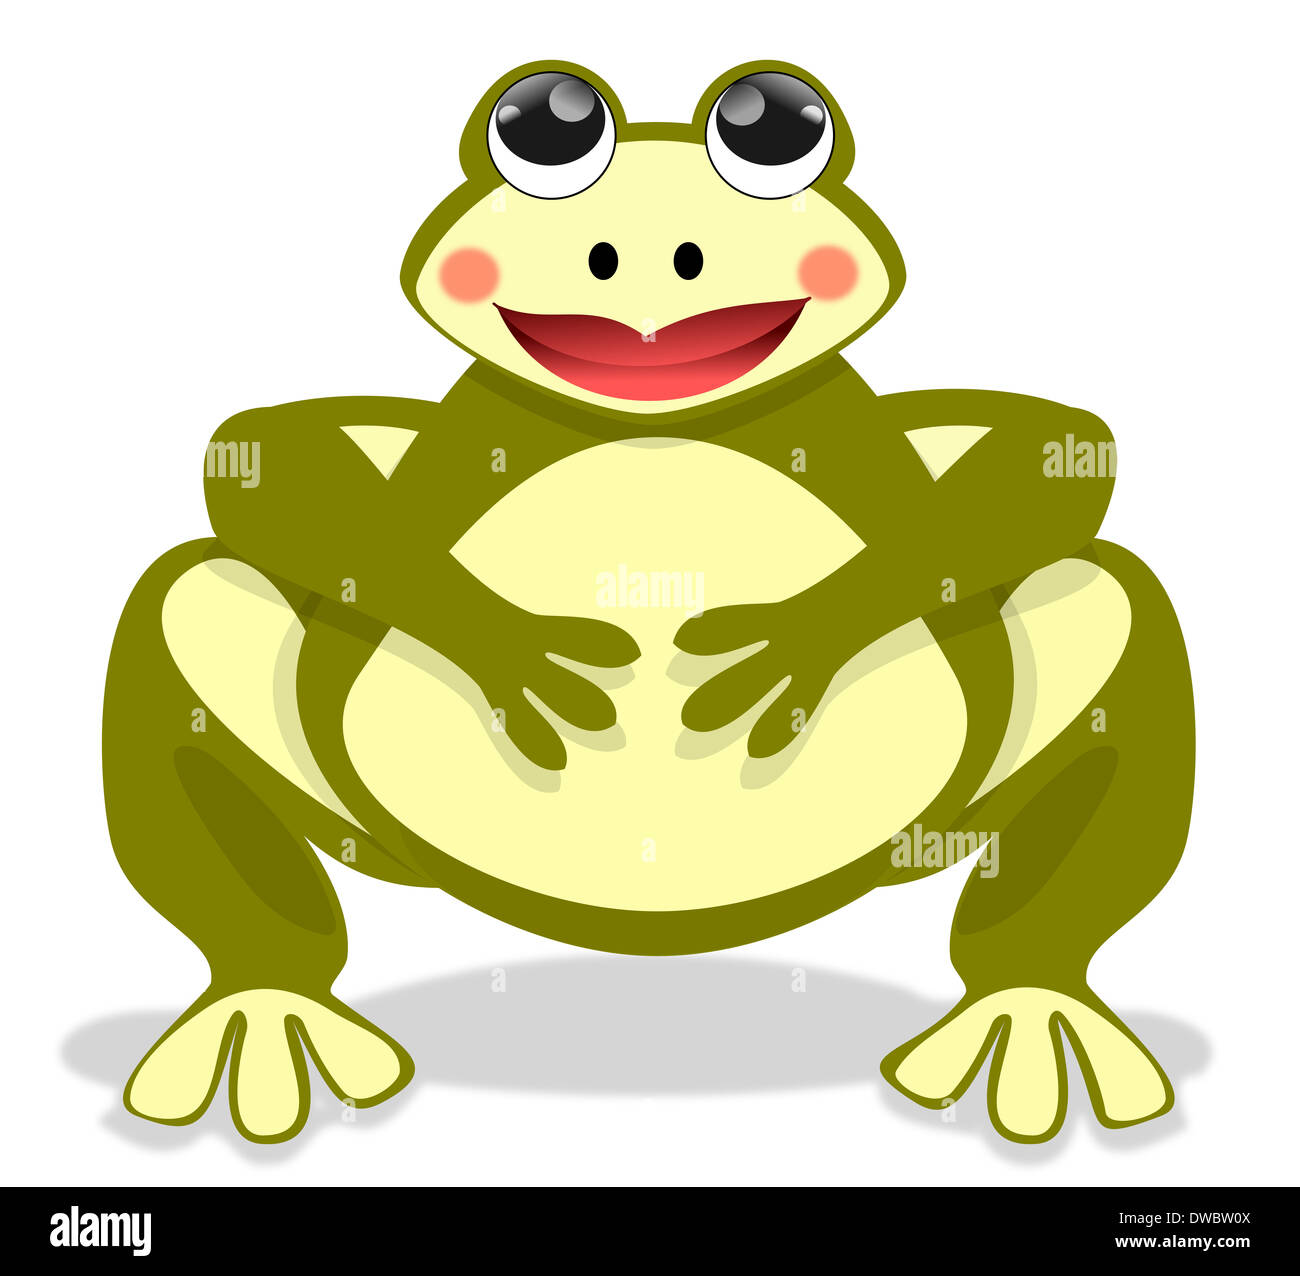 Illustration of a beautiful fat frog sitting, front view Stock Photo